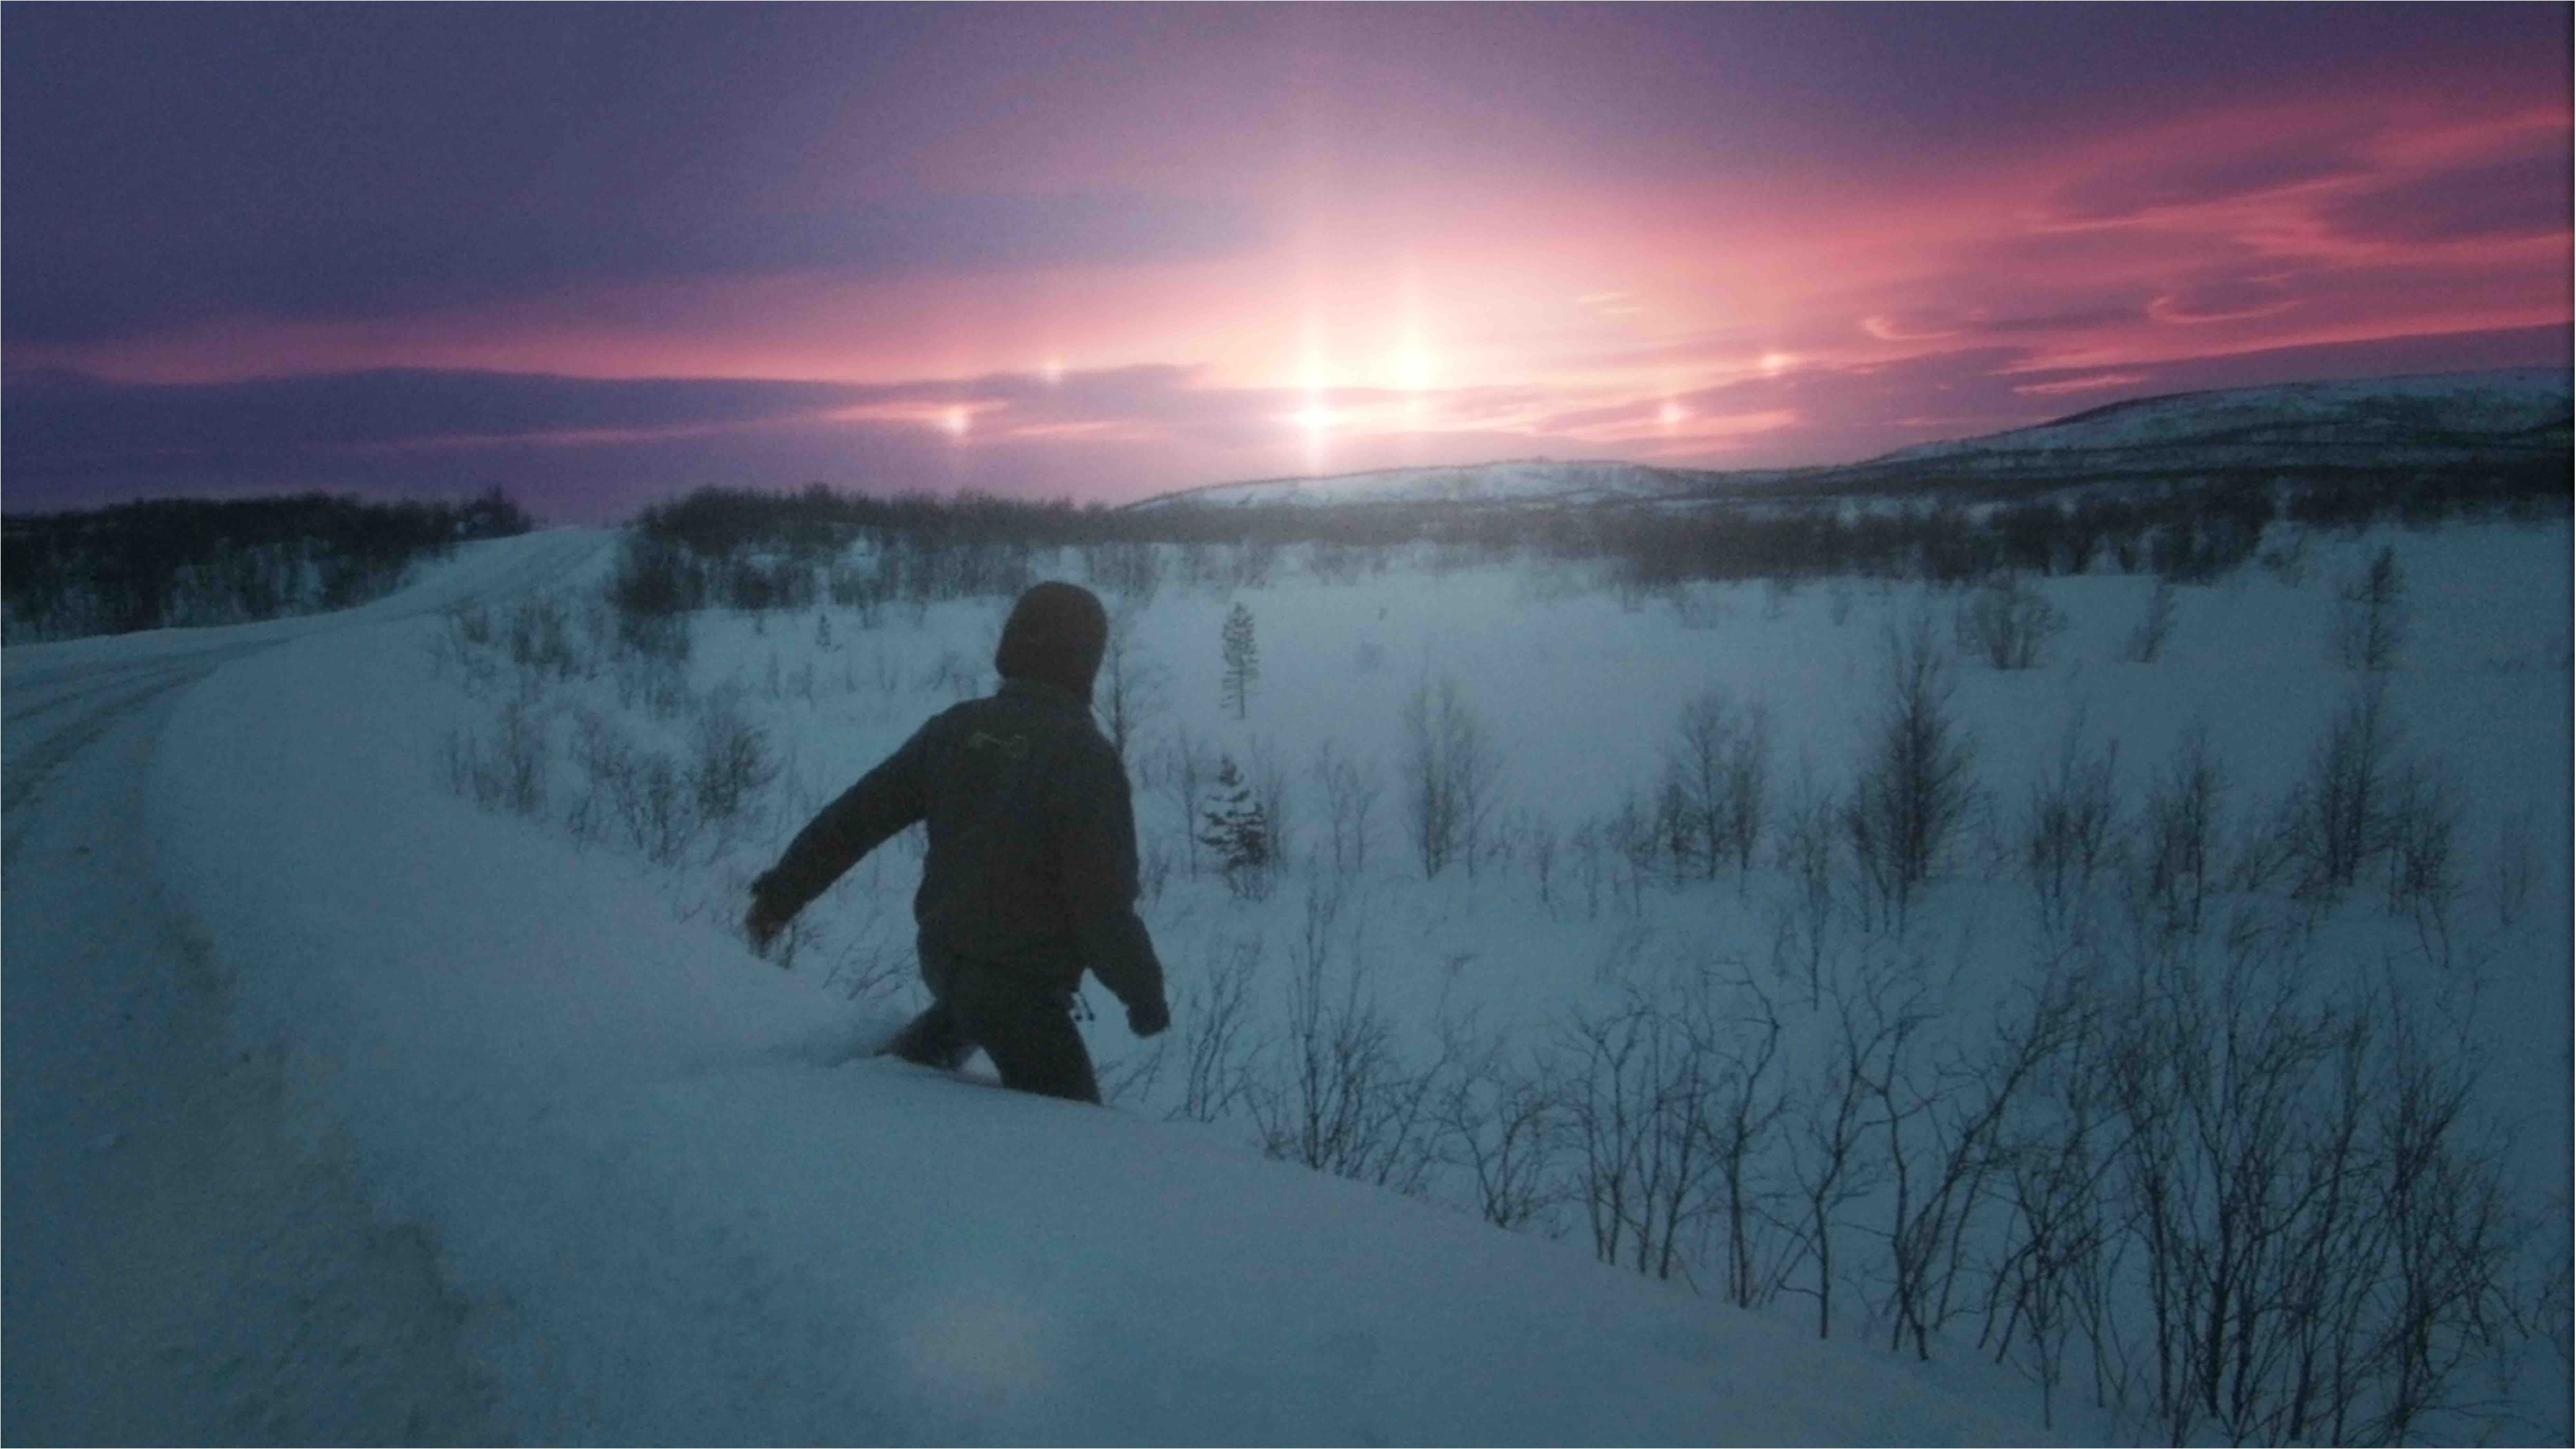 A snowy landscape scene featuring a person walking through deep snow down a slope where bare bushes peek through the snow. The sun is over the horizon, peeking through the clouds in a vivid purple and pink sky.